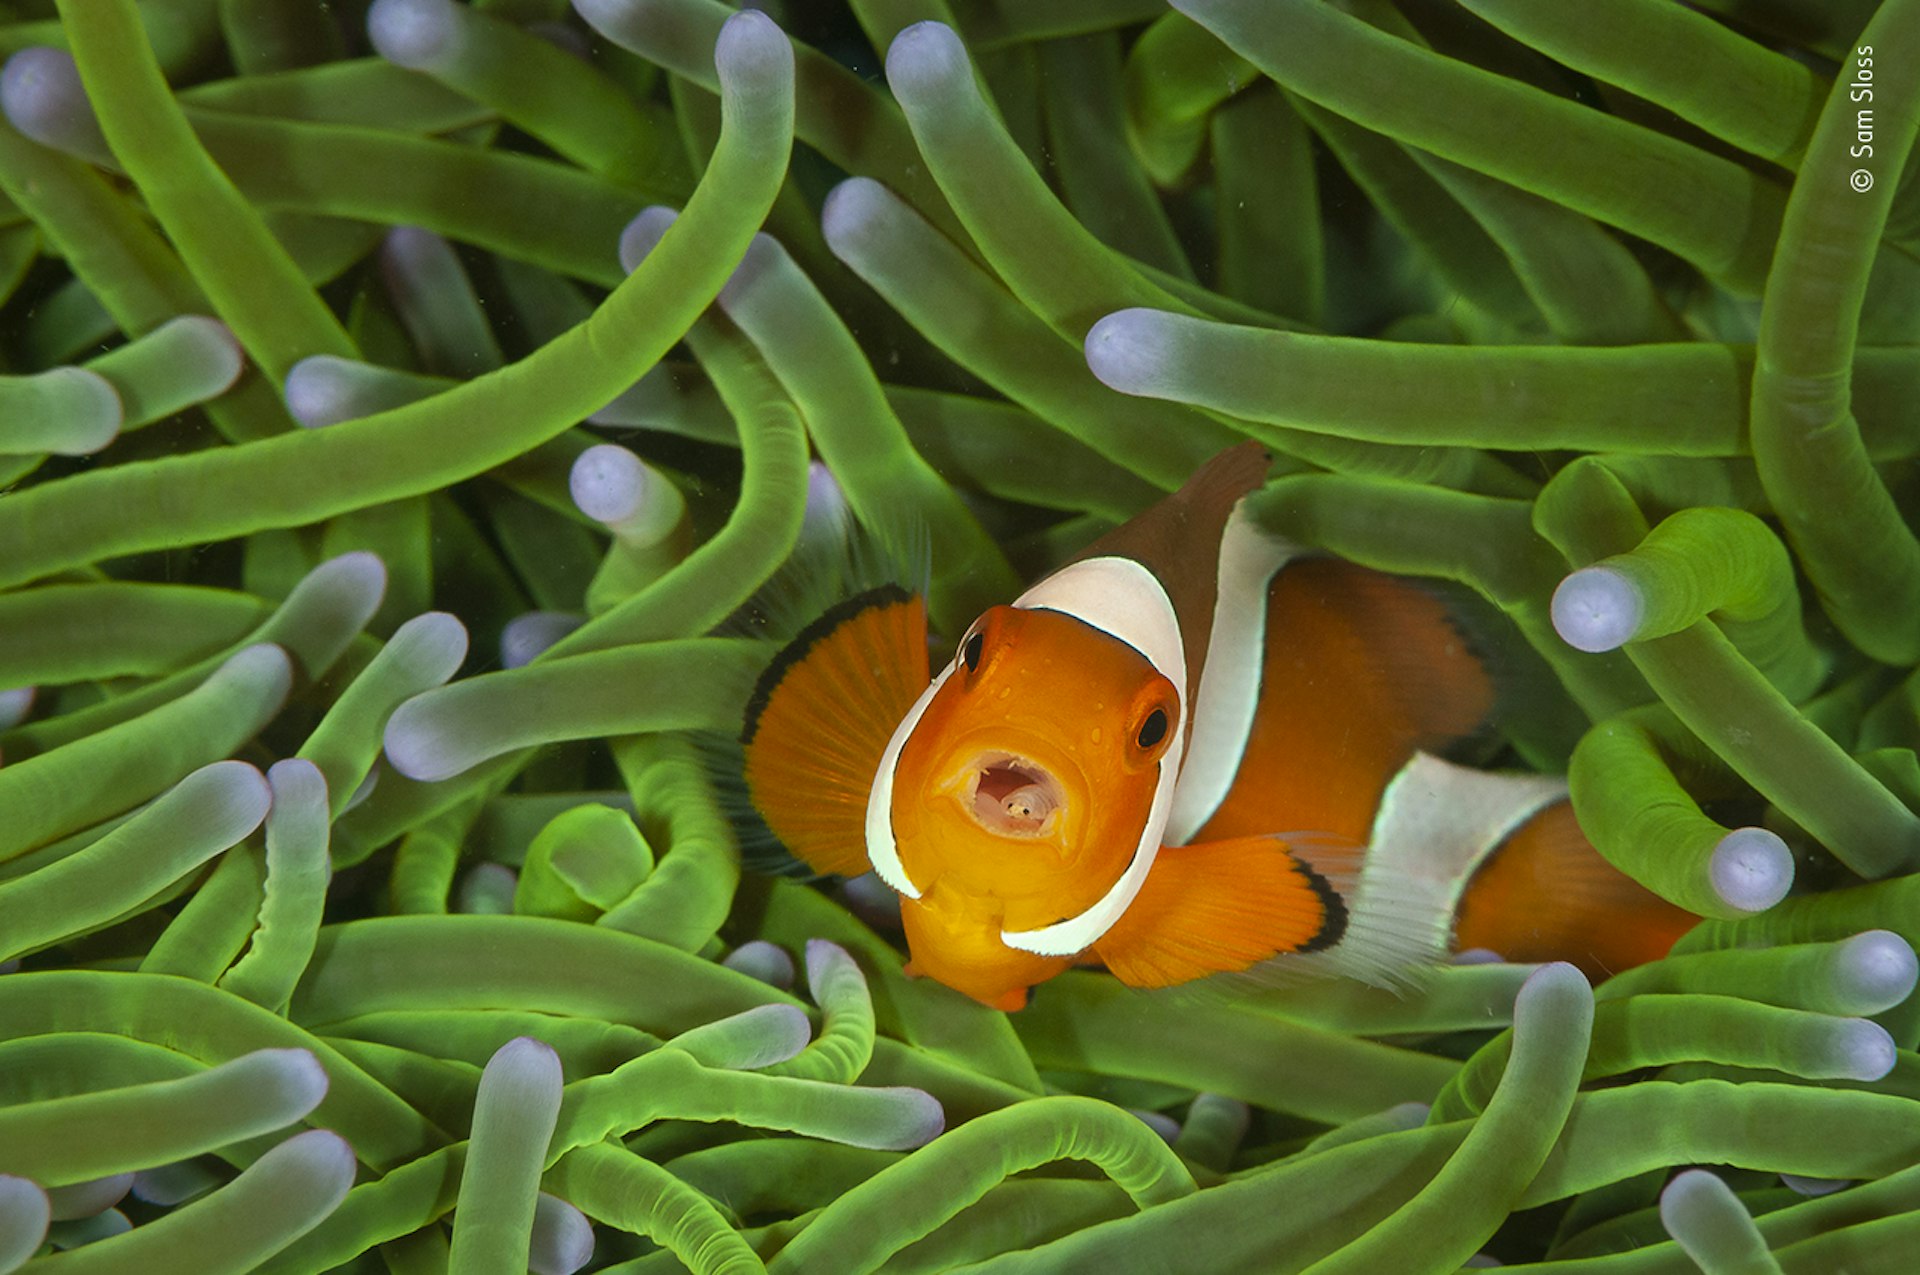 A clownfish with a tongue-eating louse in its mouth